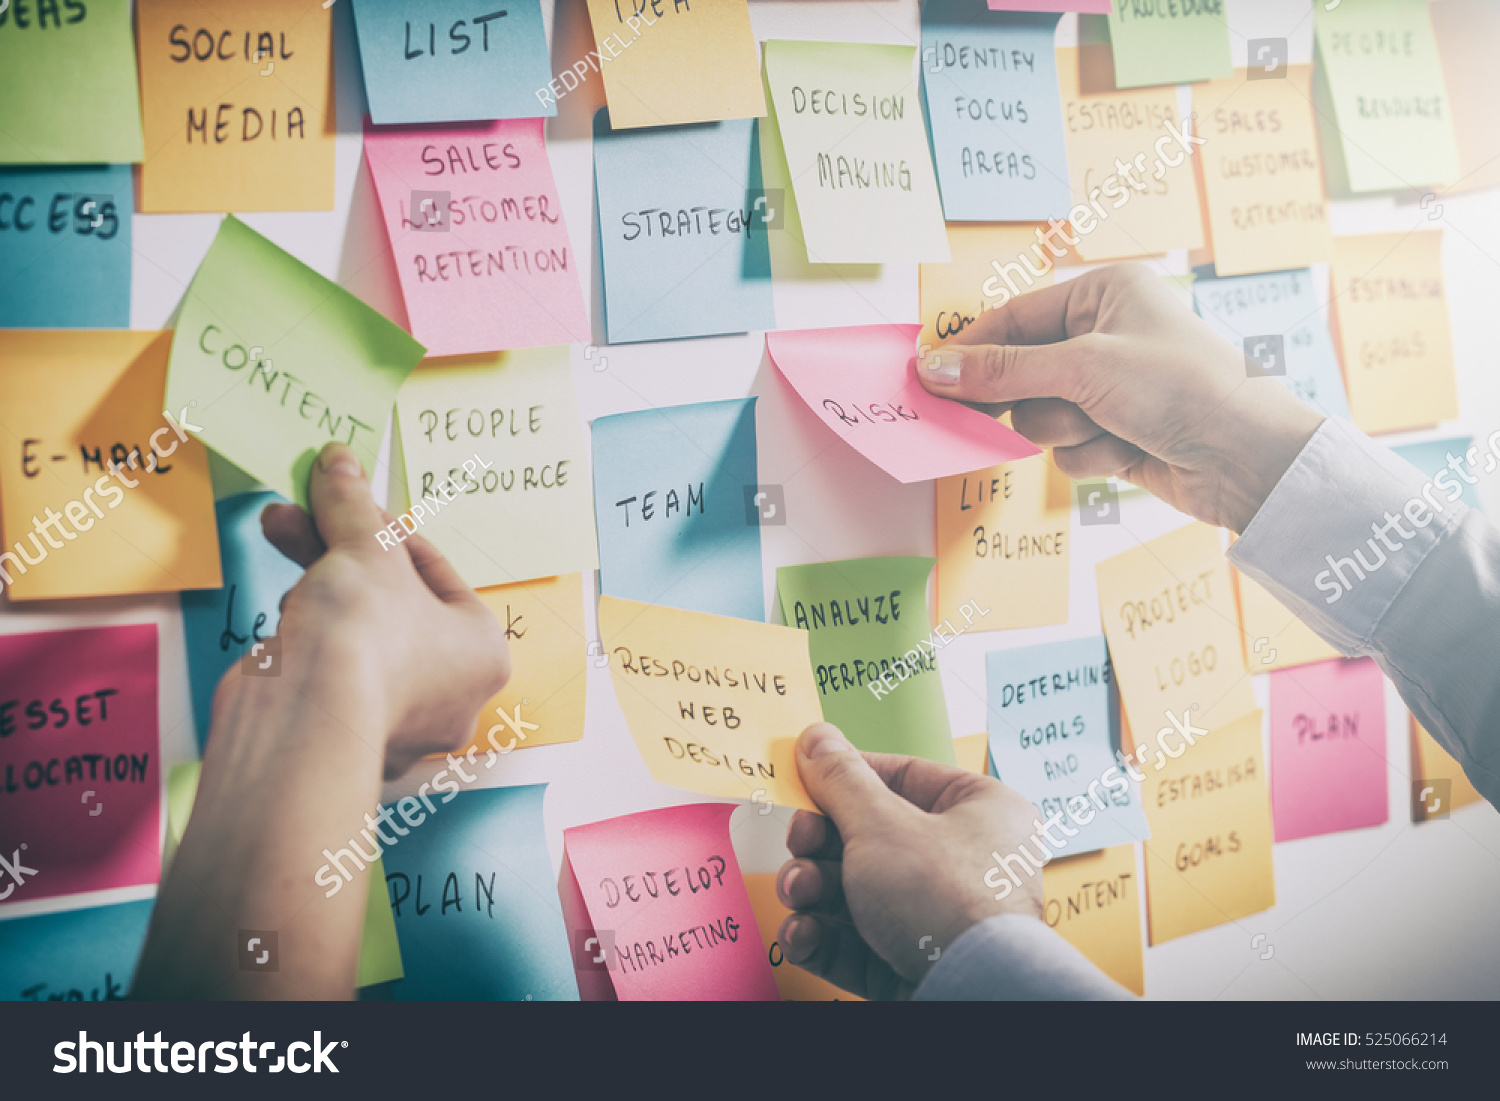 brainstorming brainstorm strategy workshop business note notes sticky - stock image #525066214